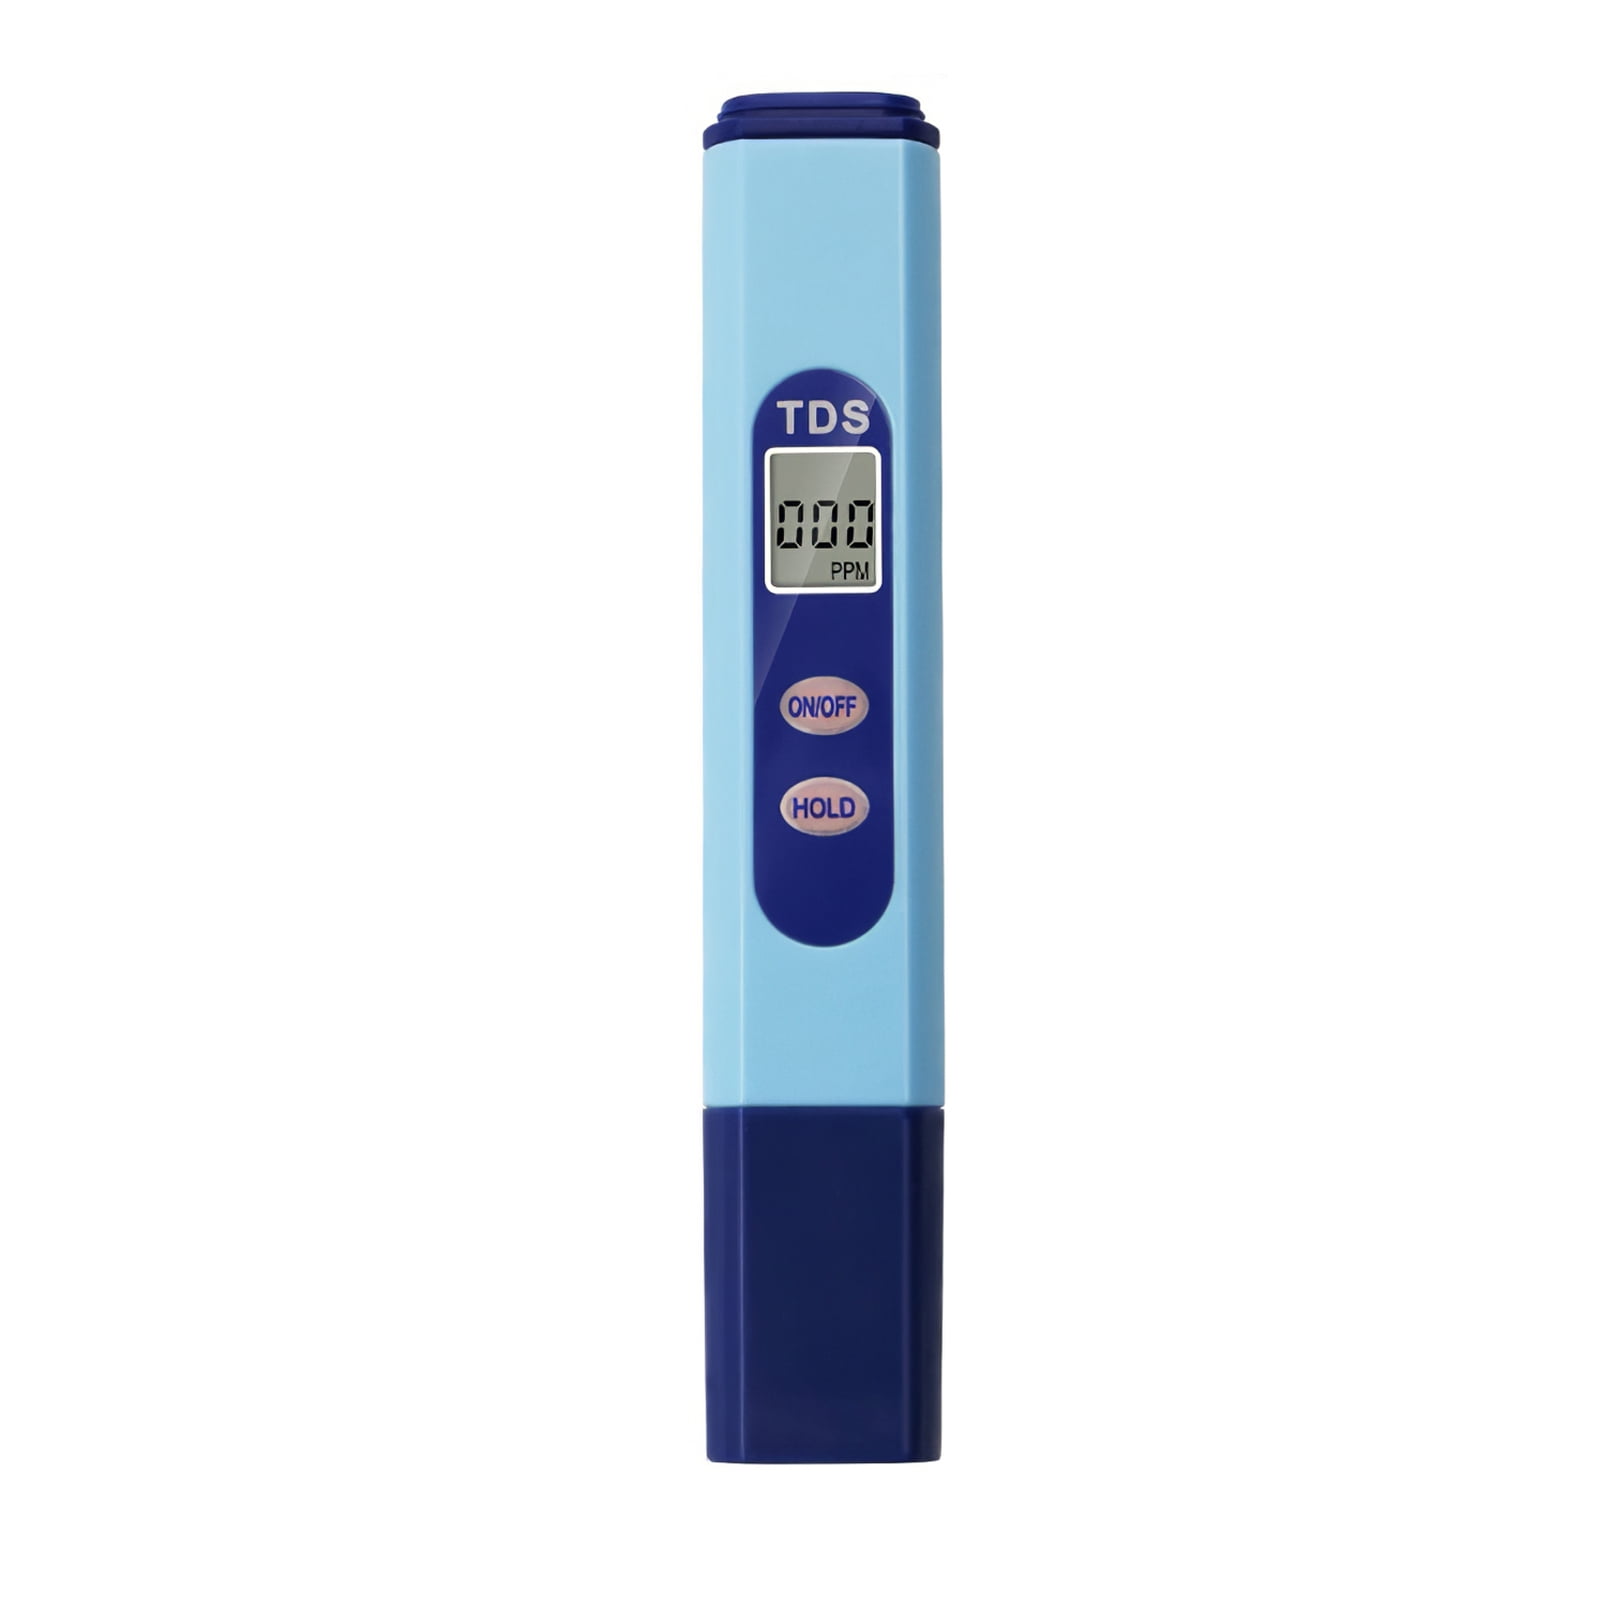 Details about   【2020 Latest】TDS Meter，NinHappy Water Quality Tester,0-9999ppm Meter,LCD Testing 